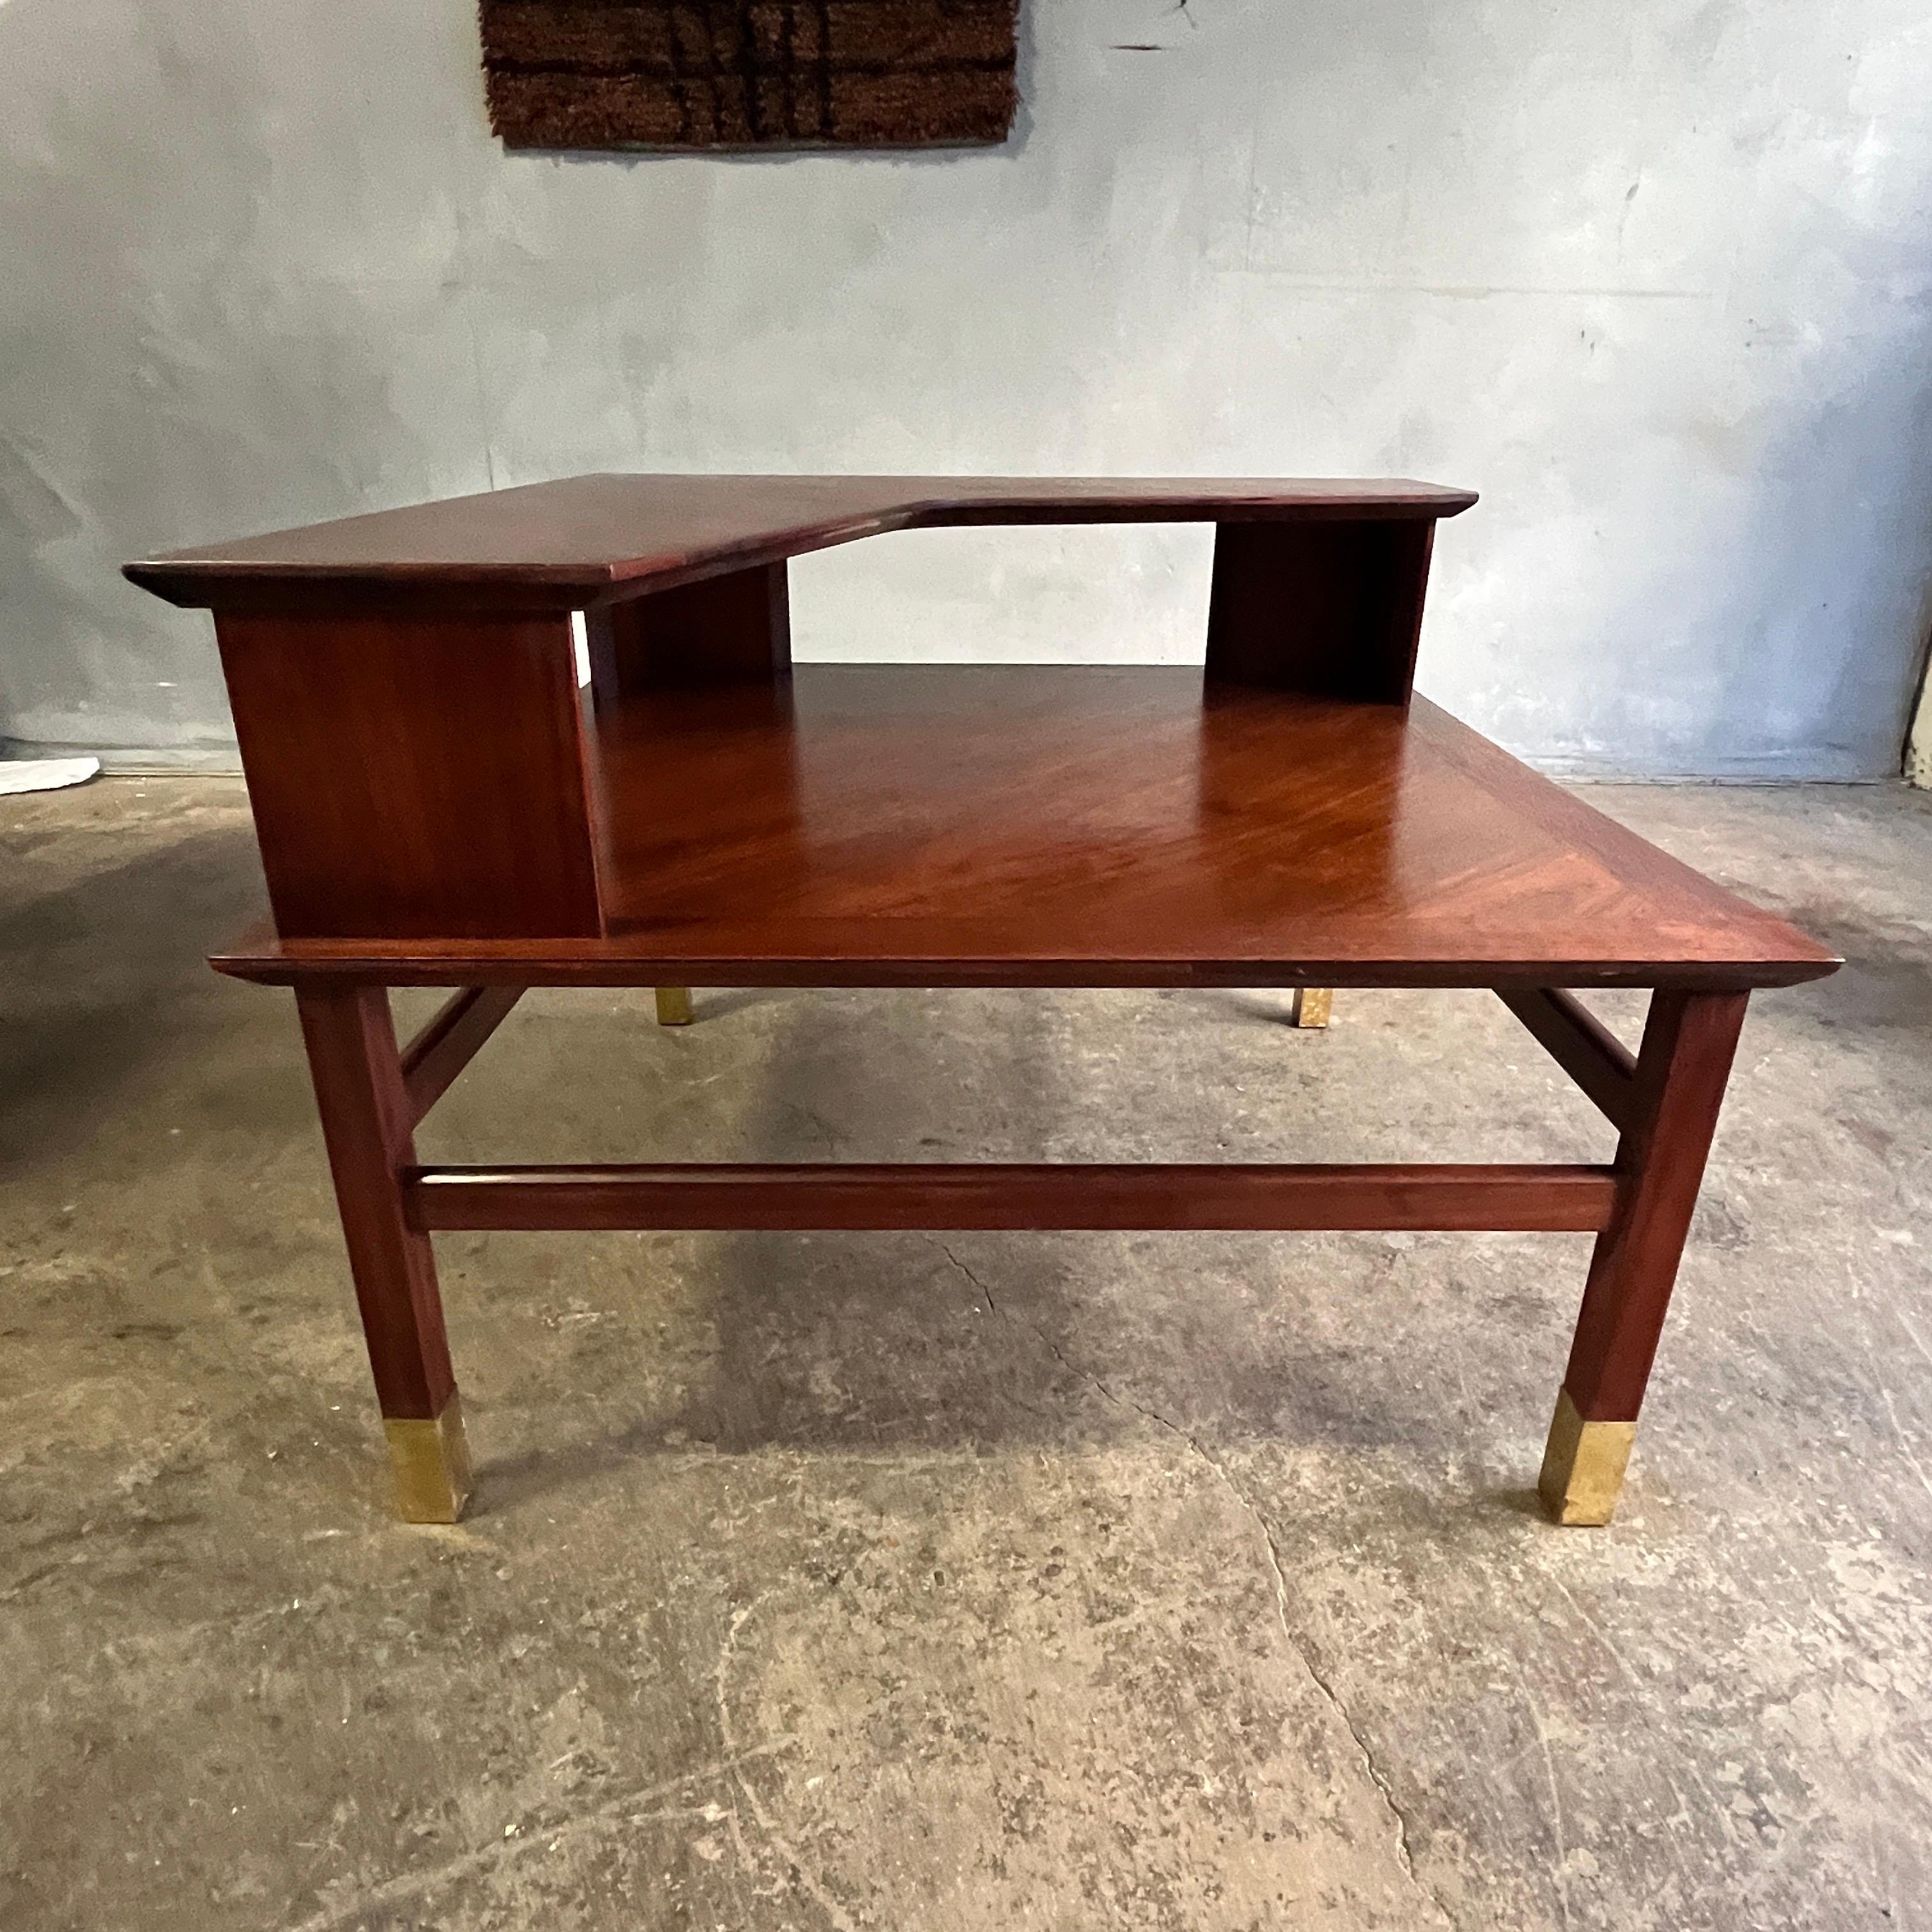 Wonderful Mid-Century Modern -corner / sofa / side /step- tables from Coronado Group by Luther Draper for Founders Furniture. Gorgeous condition. First tier of table top is 15'' high. In original condition showing little use. Circa 1955.